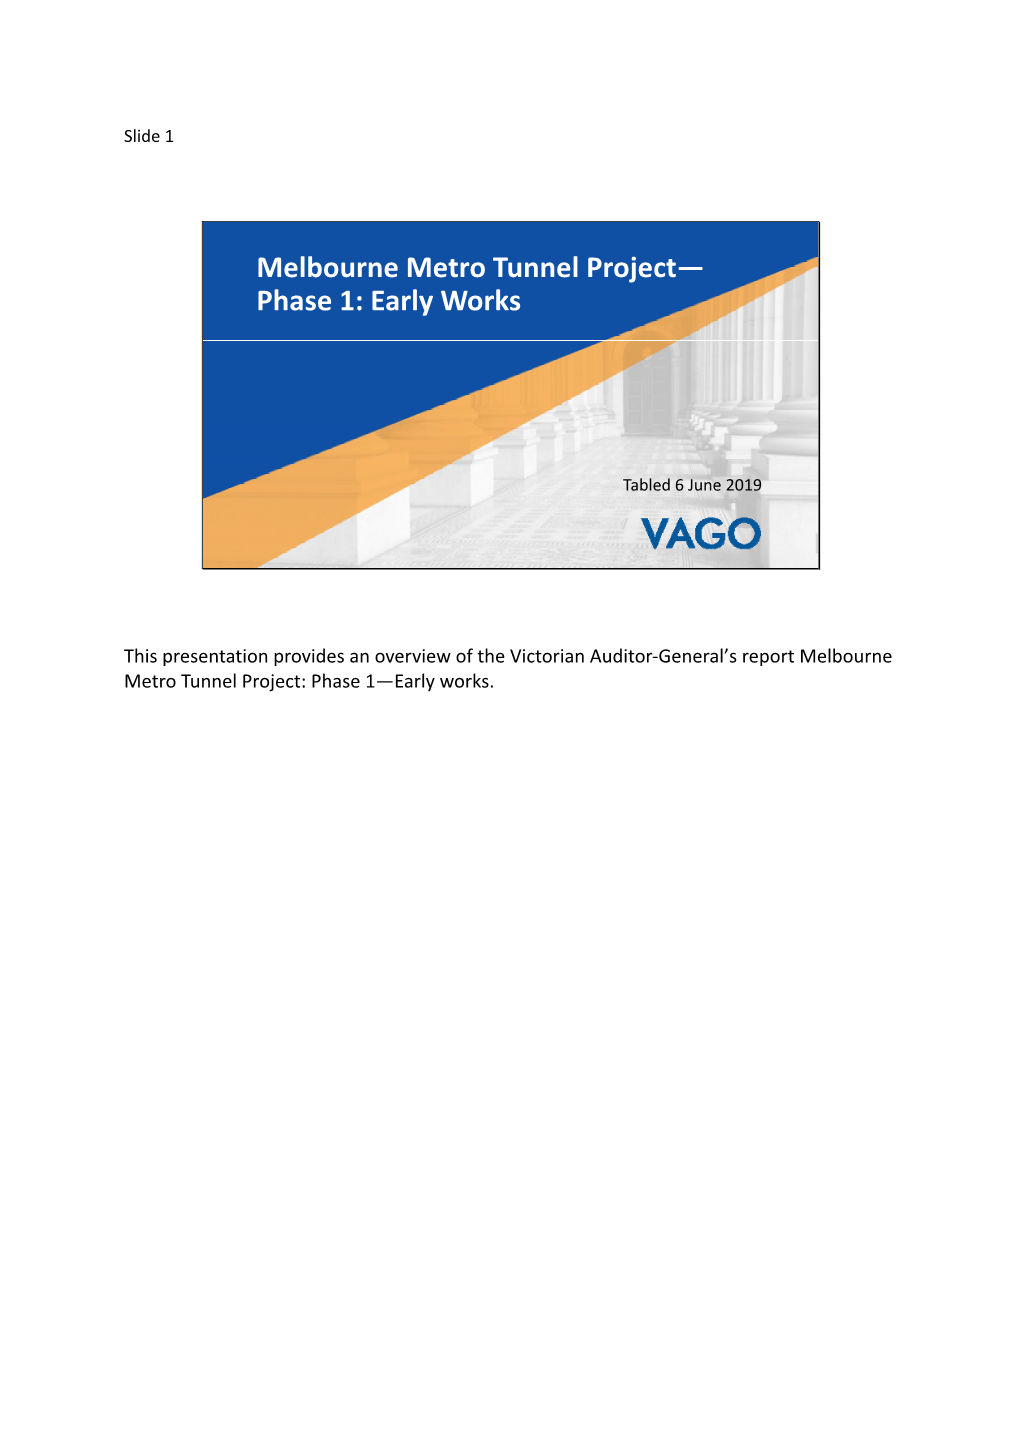 Melbourne Metro Tunnel Project— Phase 1: Early Works